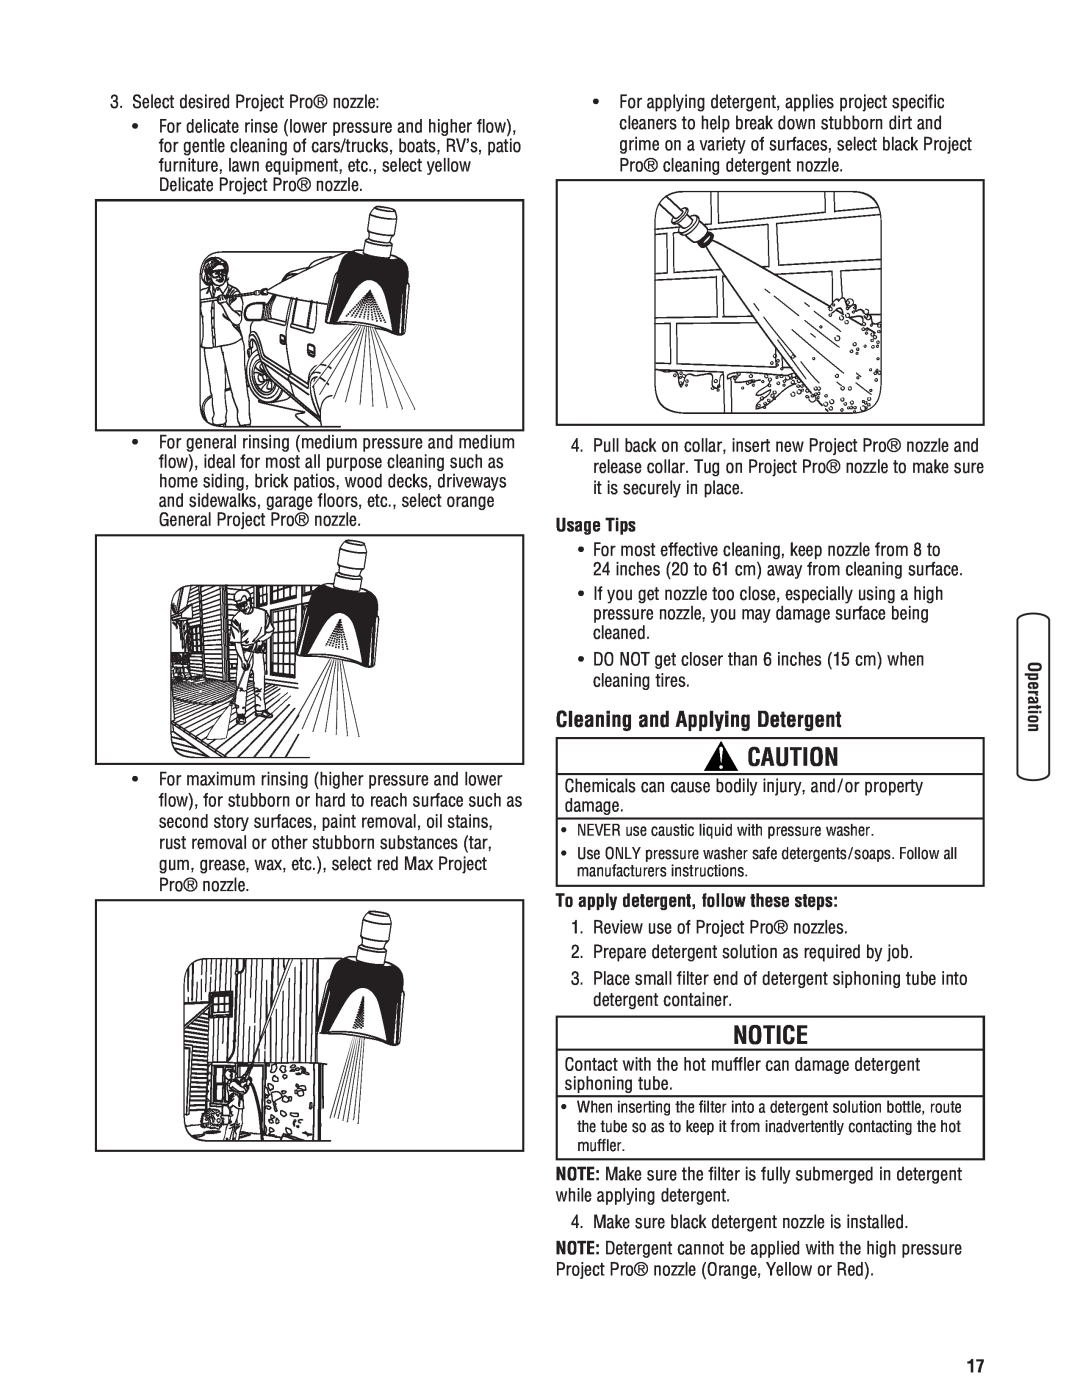 Briggs & Stratton 020364-0 Notice, Cleaning and Applying Detergent, Usage Tips, To apply detergent, follow these steps 